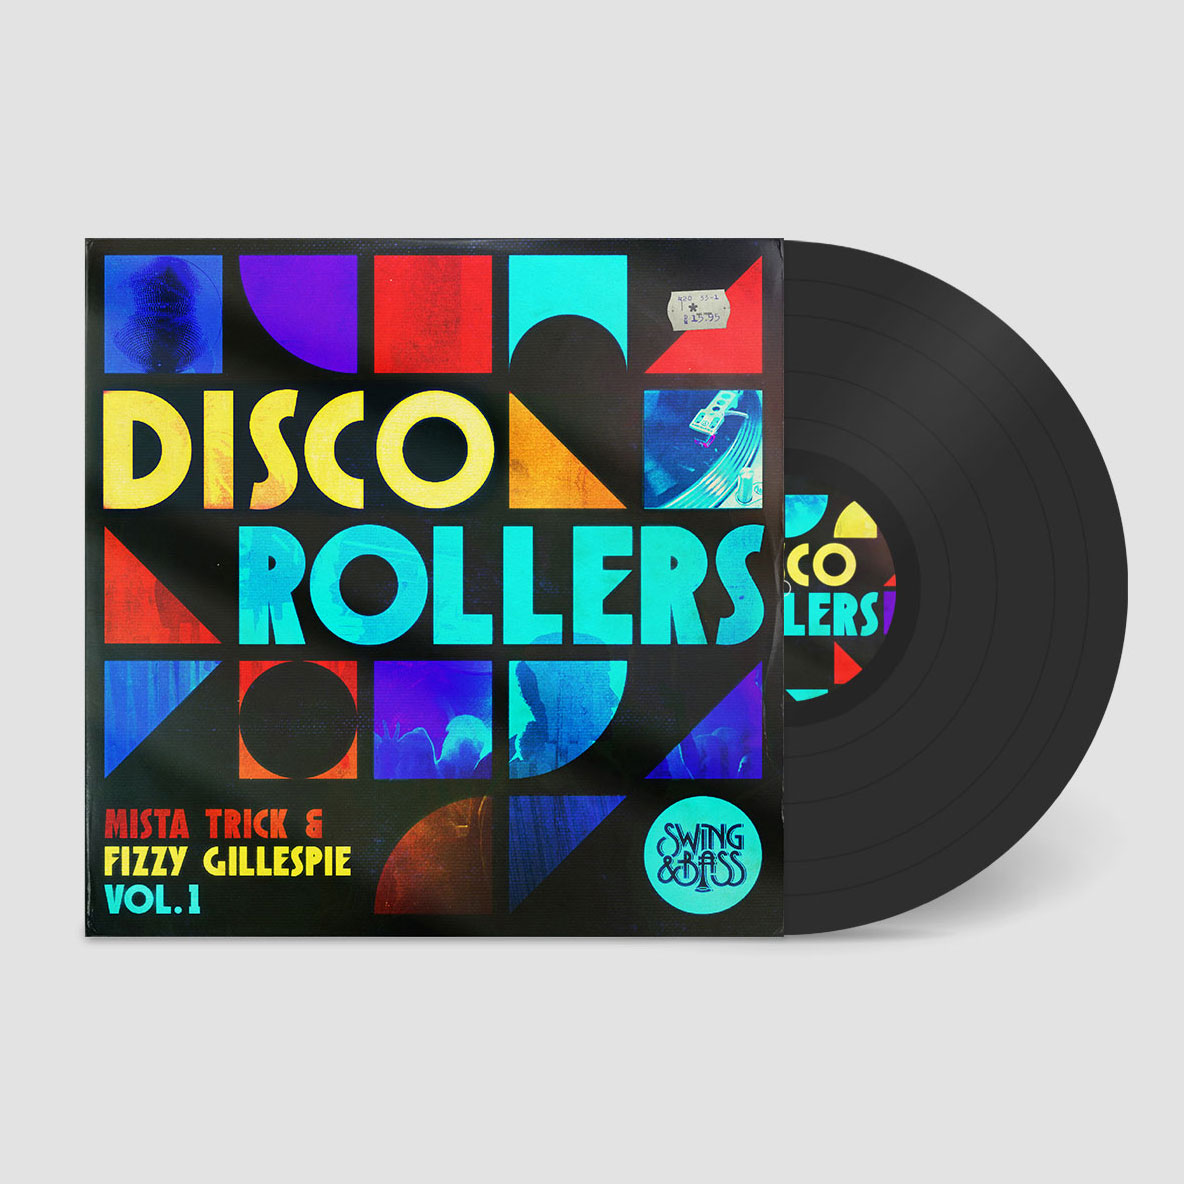 PRE ORDER: Limited Edition 12″ Vinyl – Disco Rollers Vol​.​1